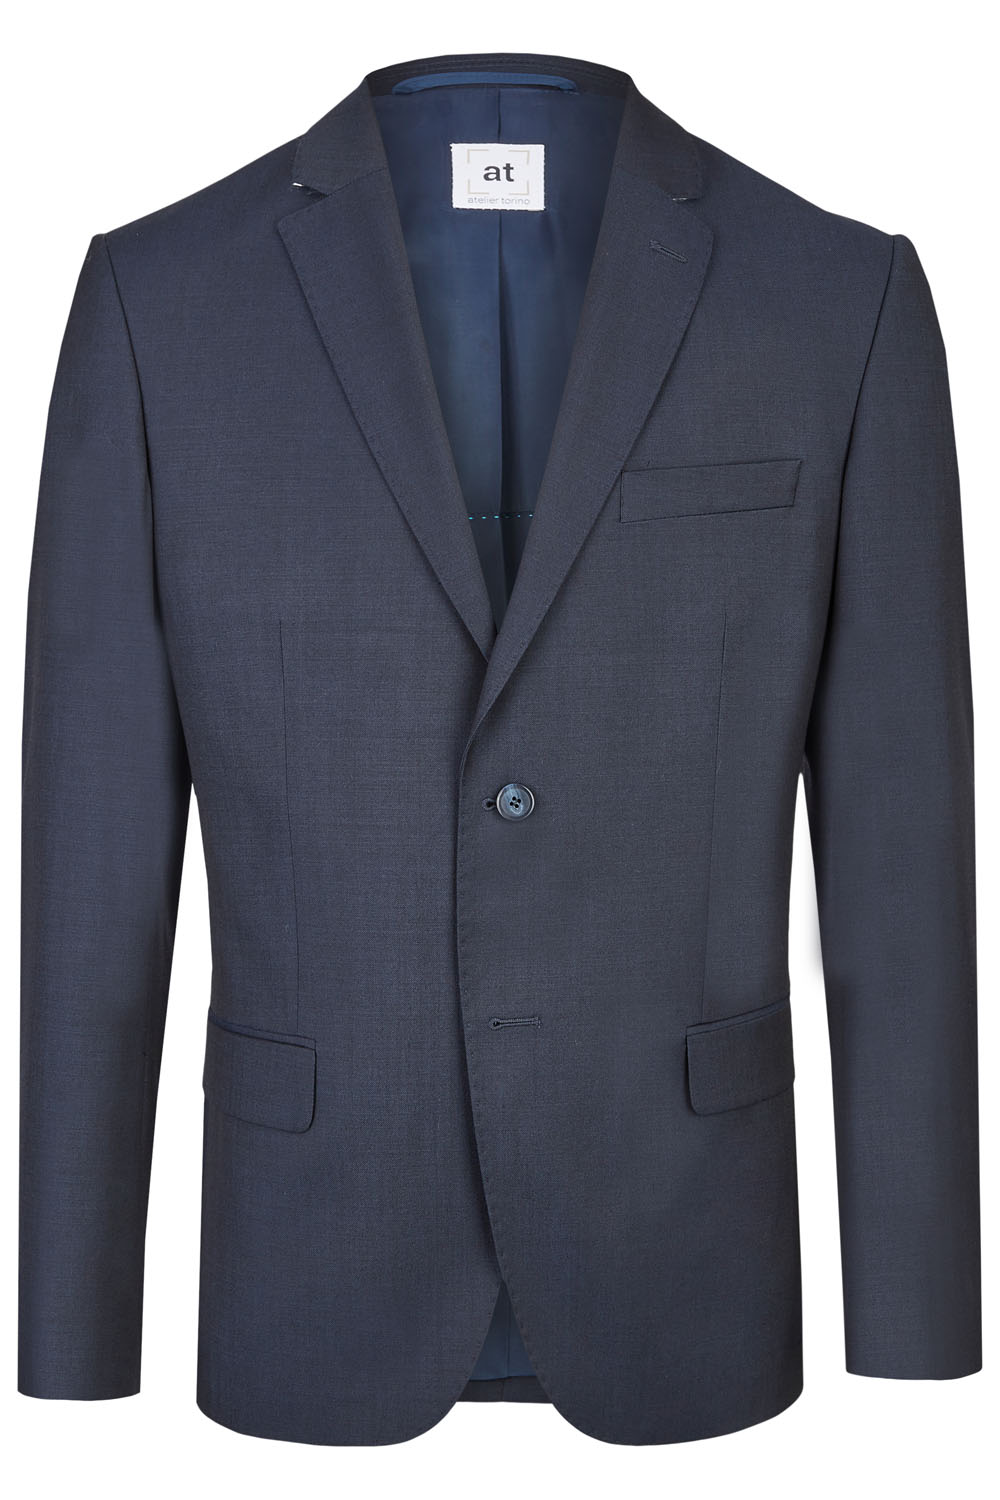 Navy 3 Piece Suit - Tom Murphy's Formal and Menswear